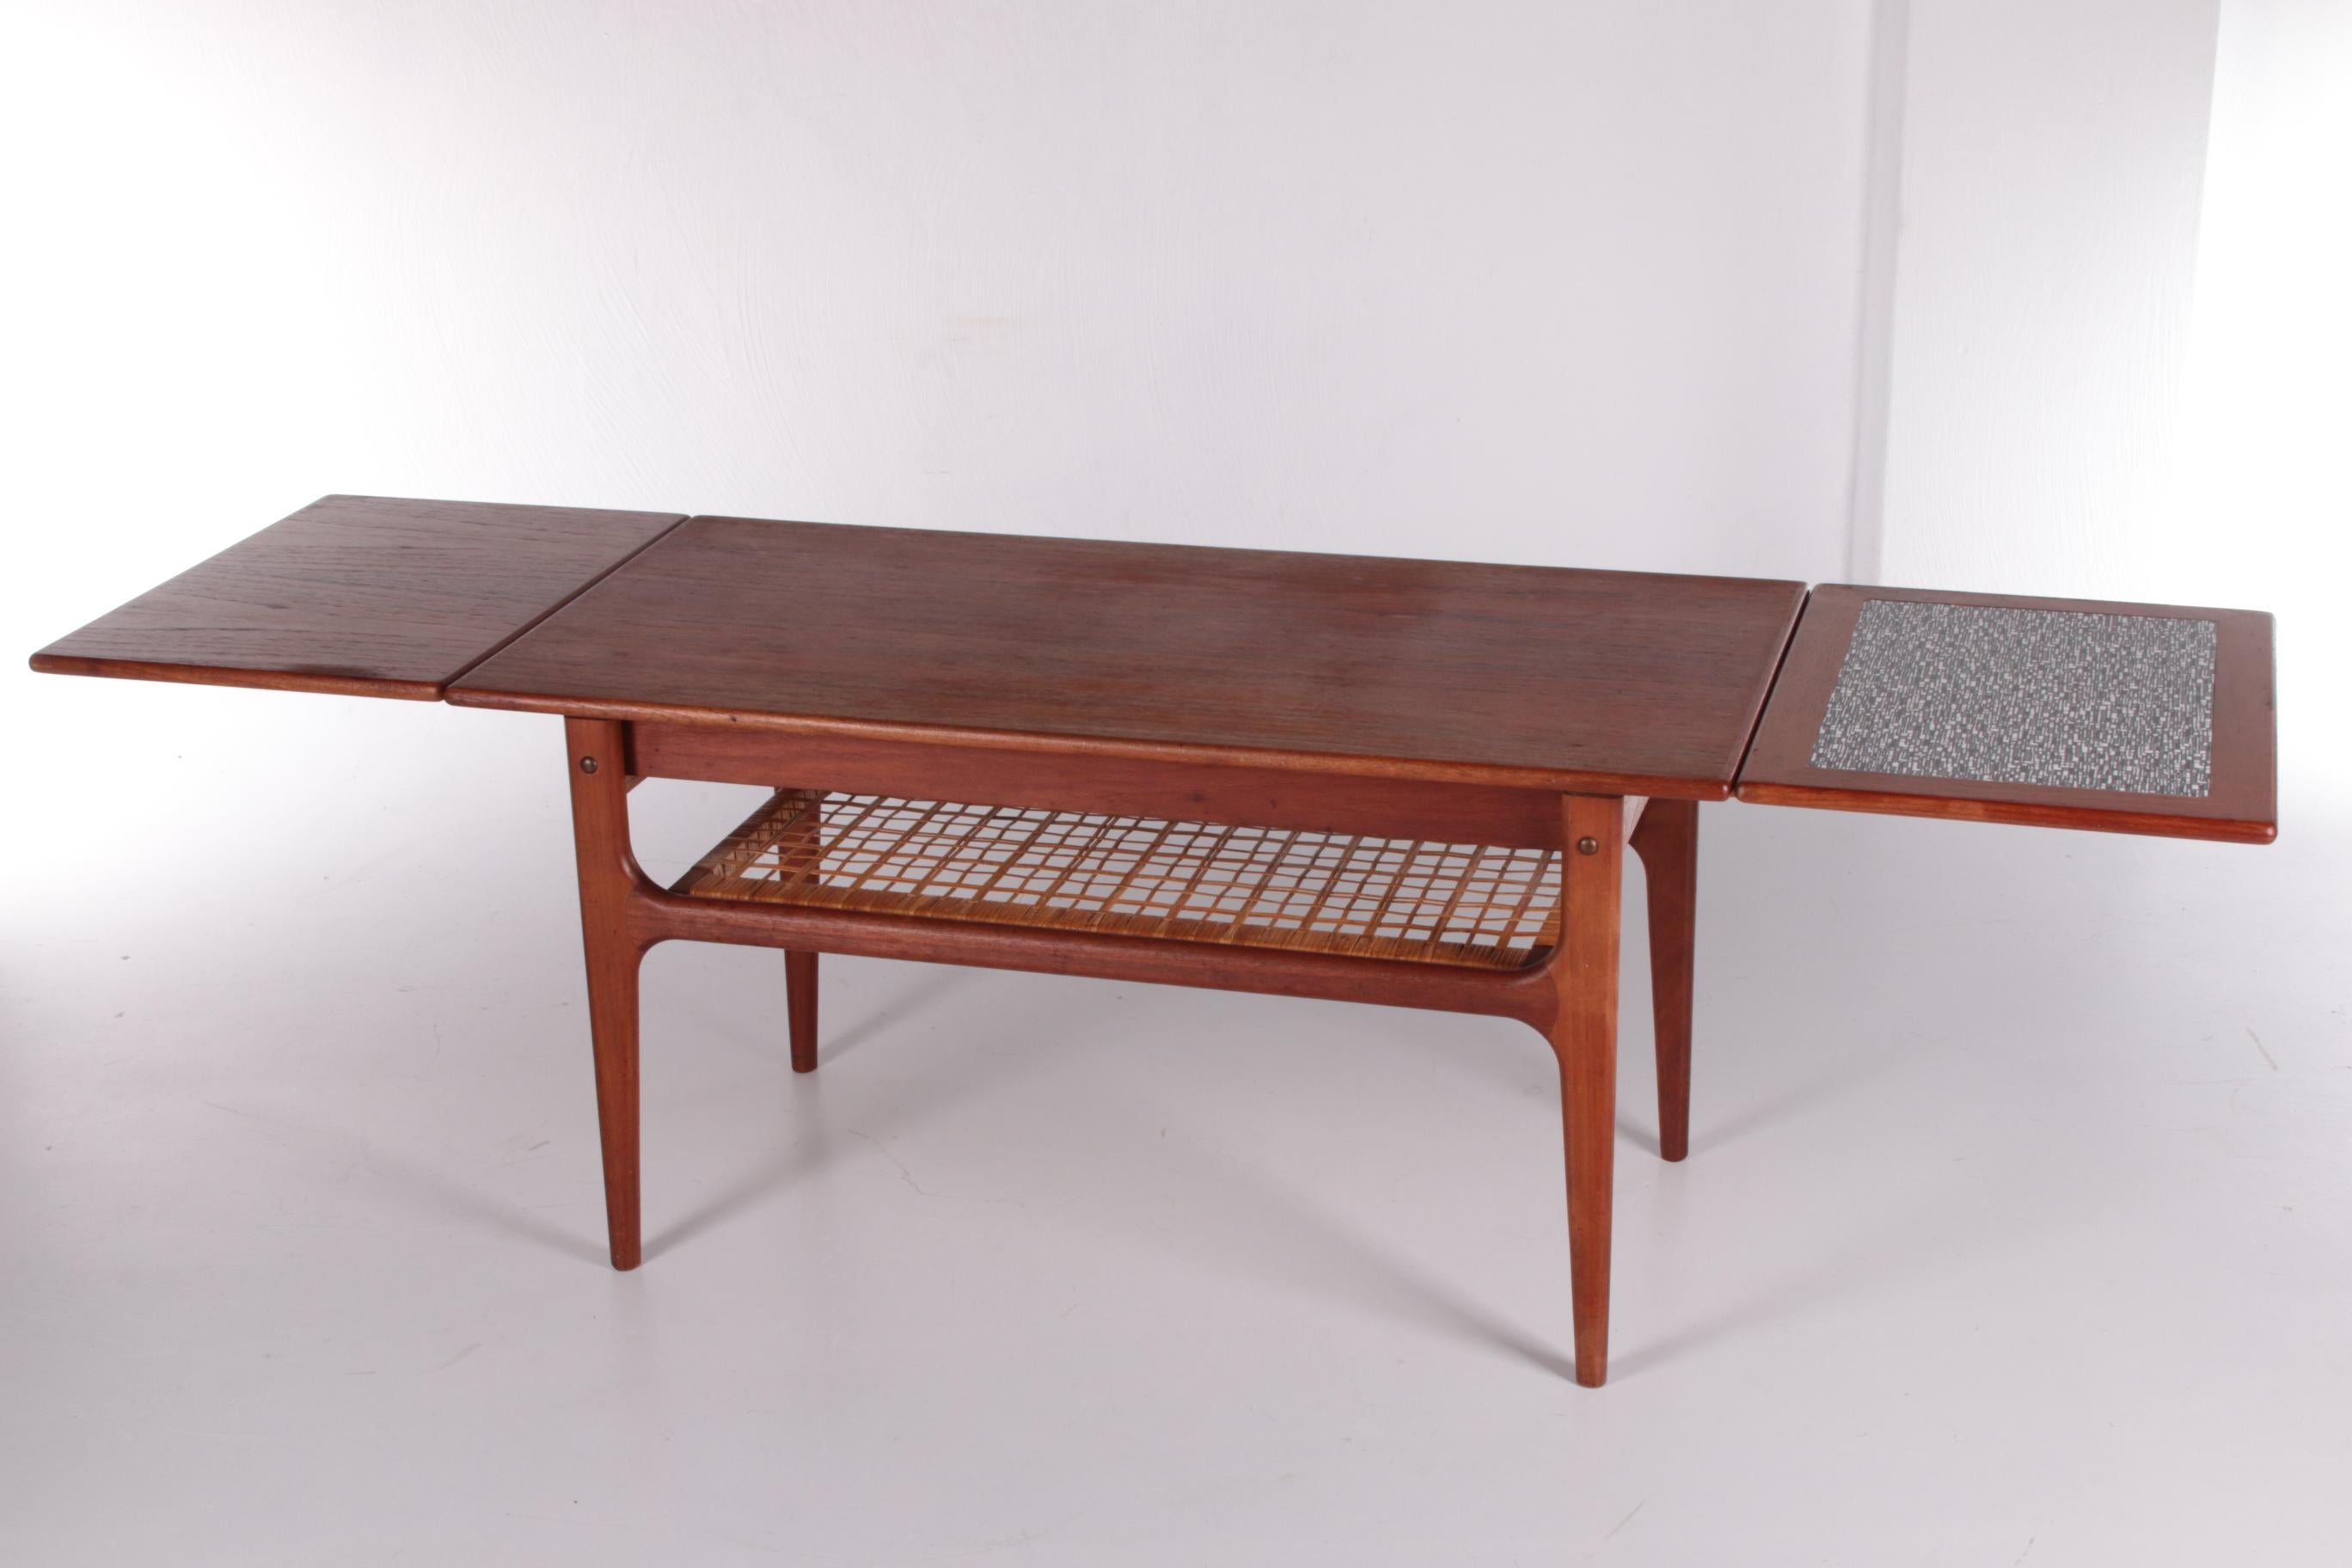 Wicker Danish Design Coffee Table made by Trioh Denmark For Sale